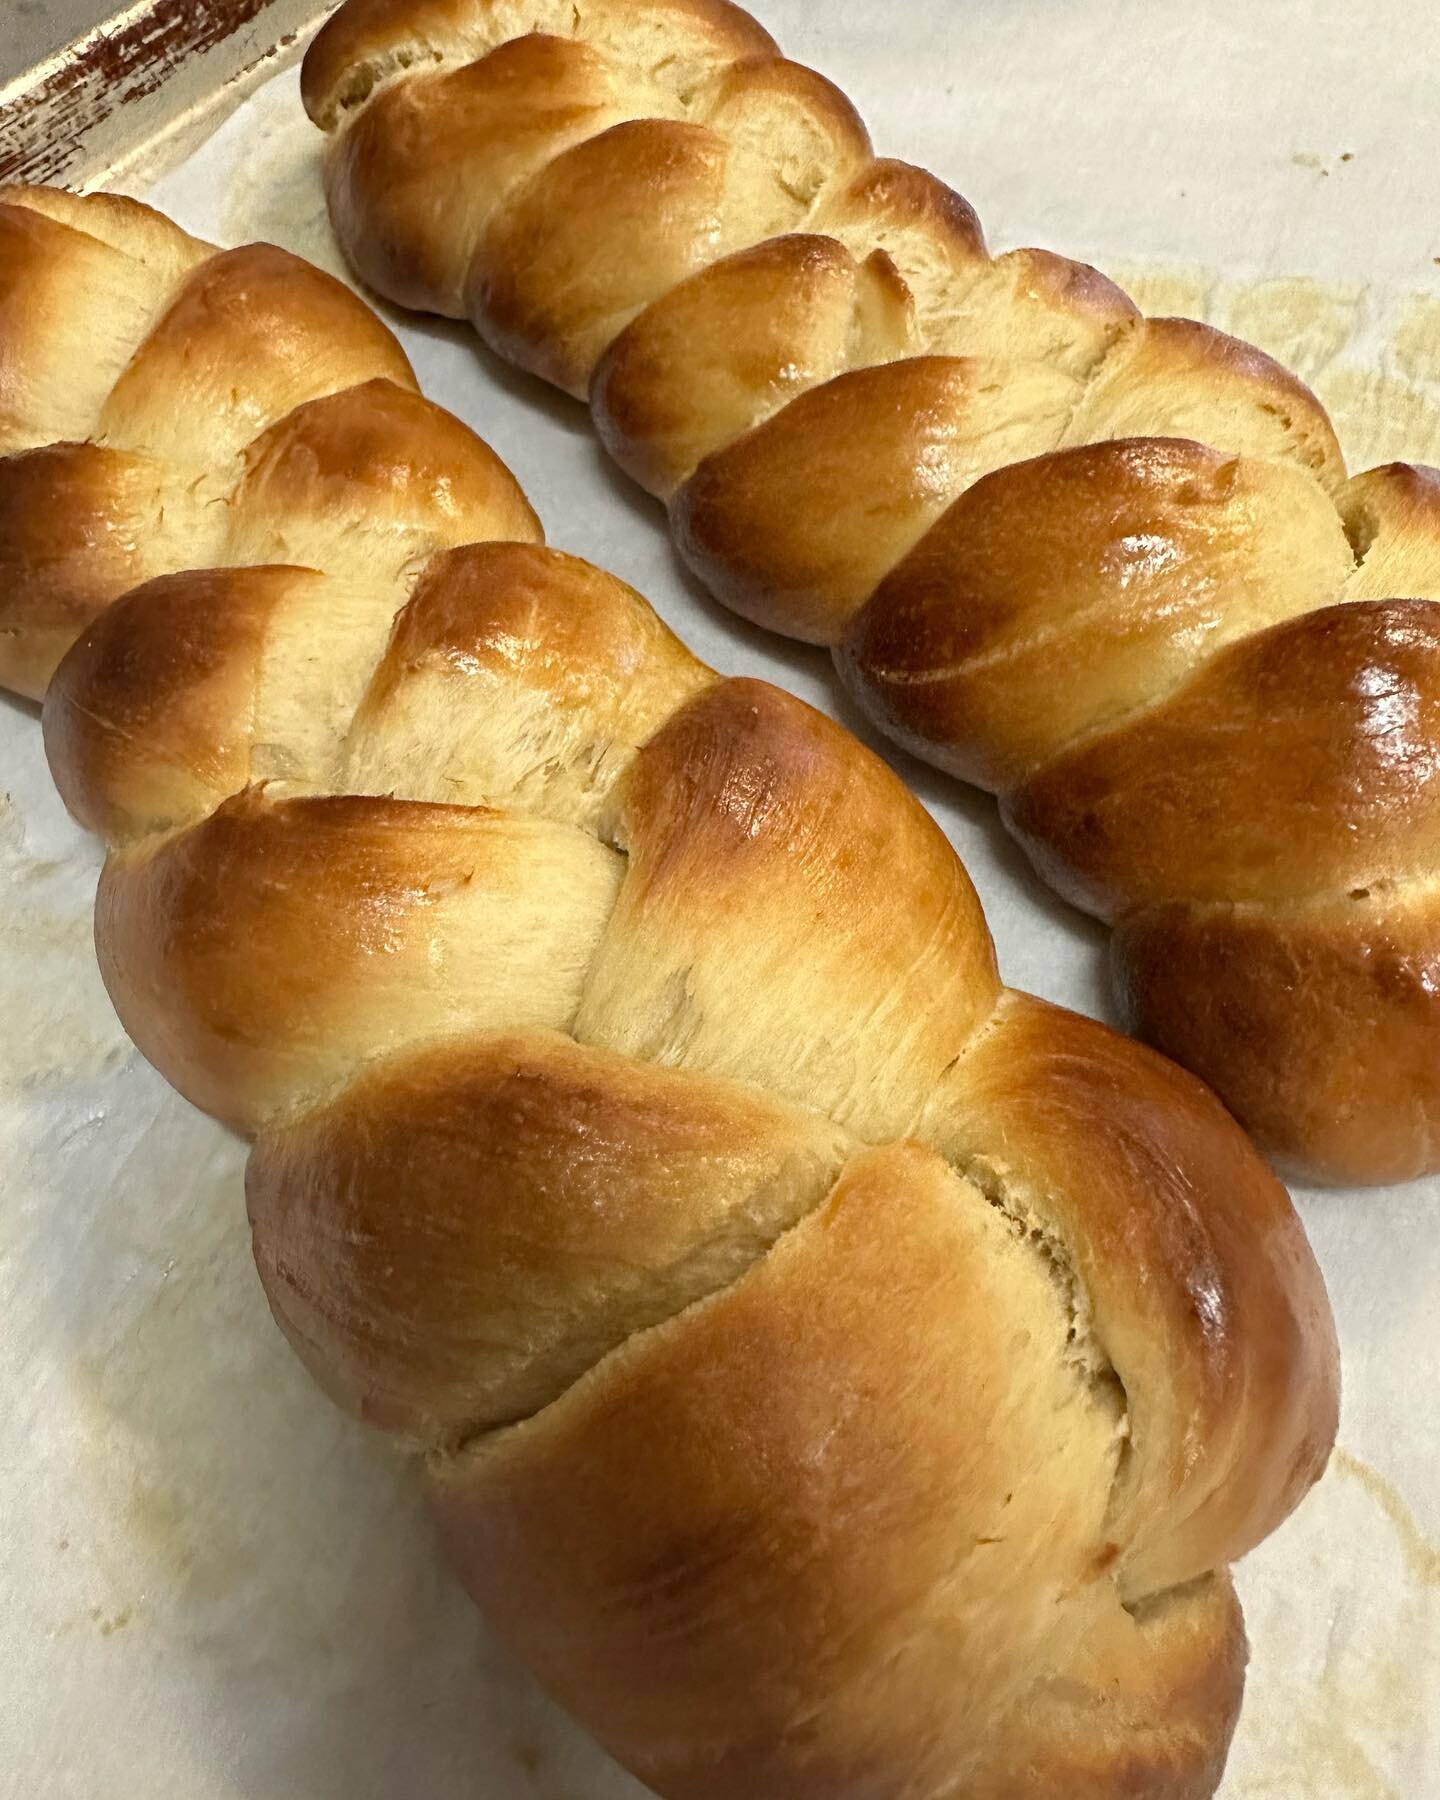 Like challah? We have some beauties made with a hint of tahini if you&rsquo;re interested. Have a great weekend!